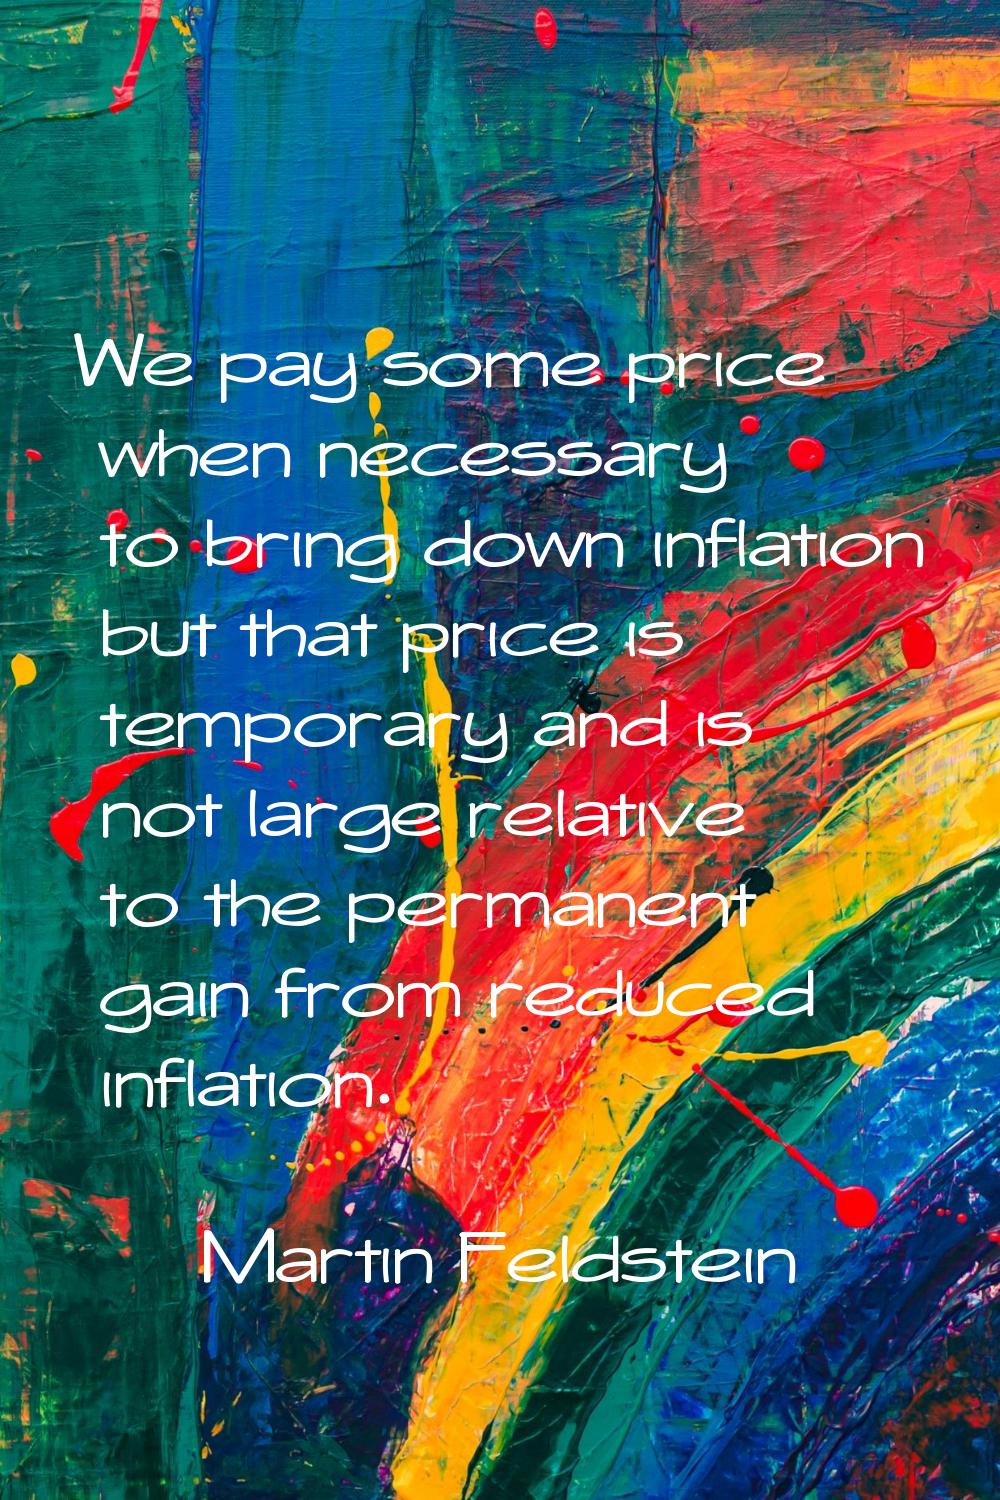 We pay some price when necessary to bring down inflation but that price is temporary and is not lar